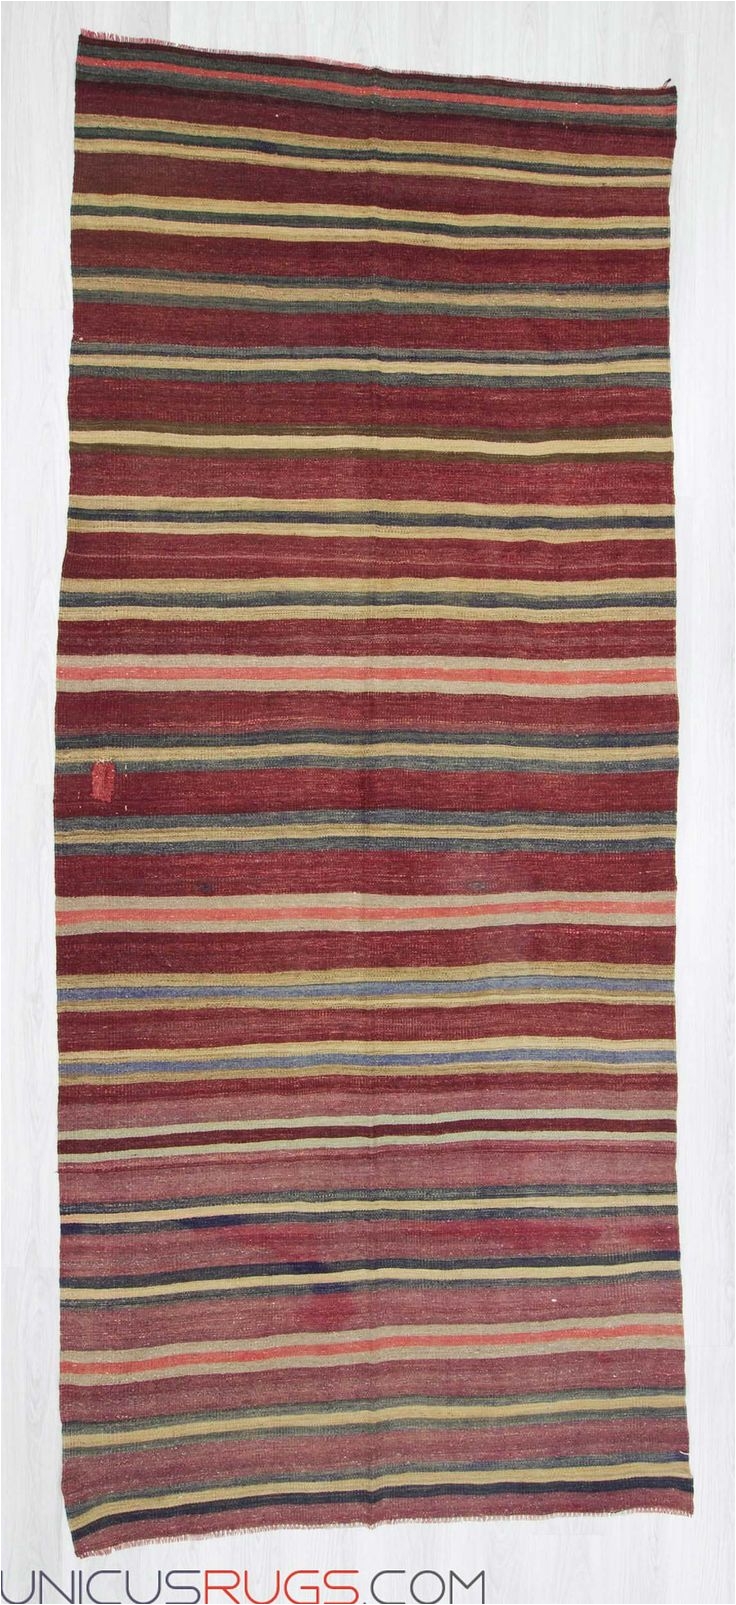 vintage hand woven striped kilim rug from konya region of turkey in good condition